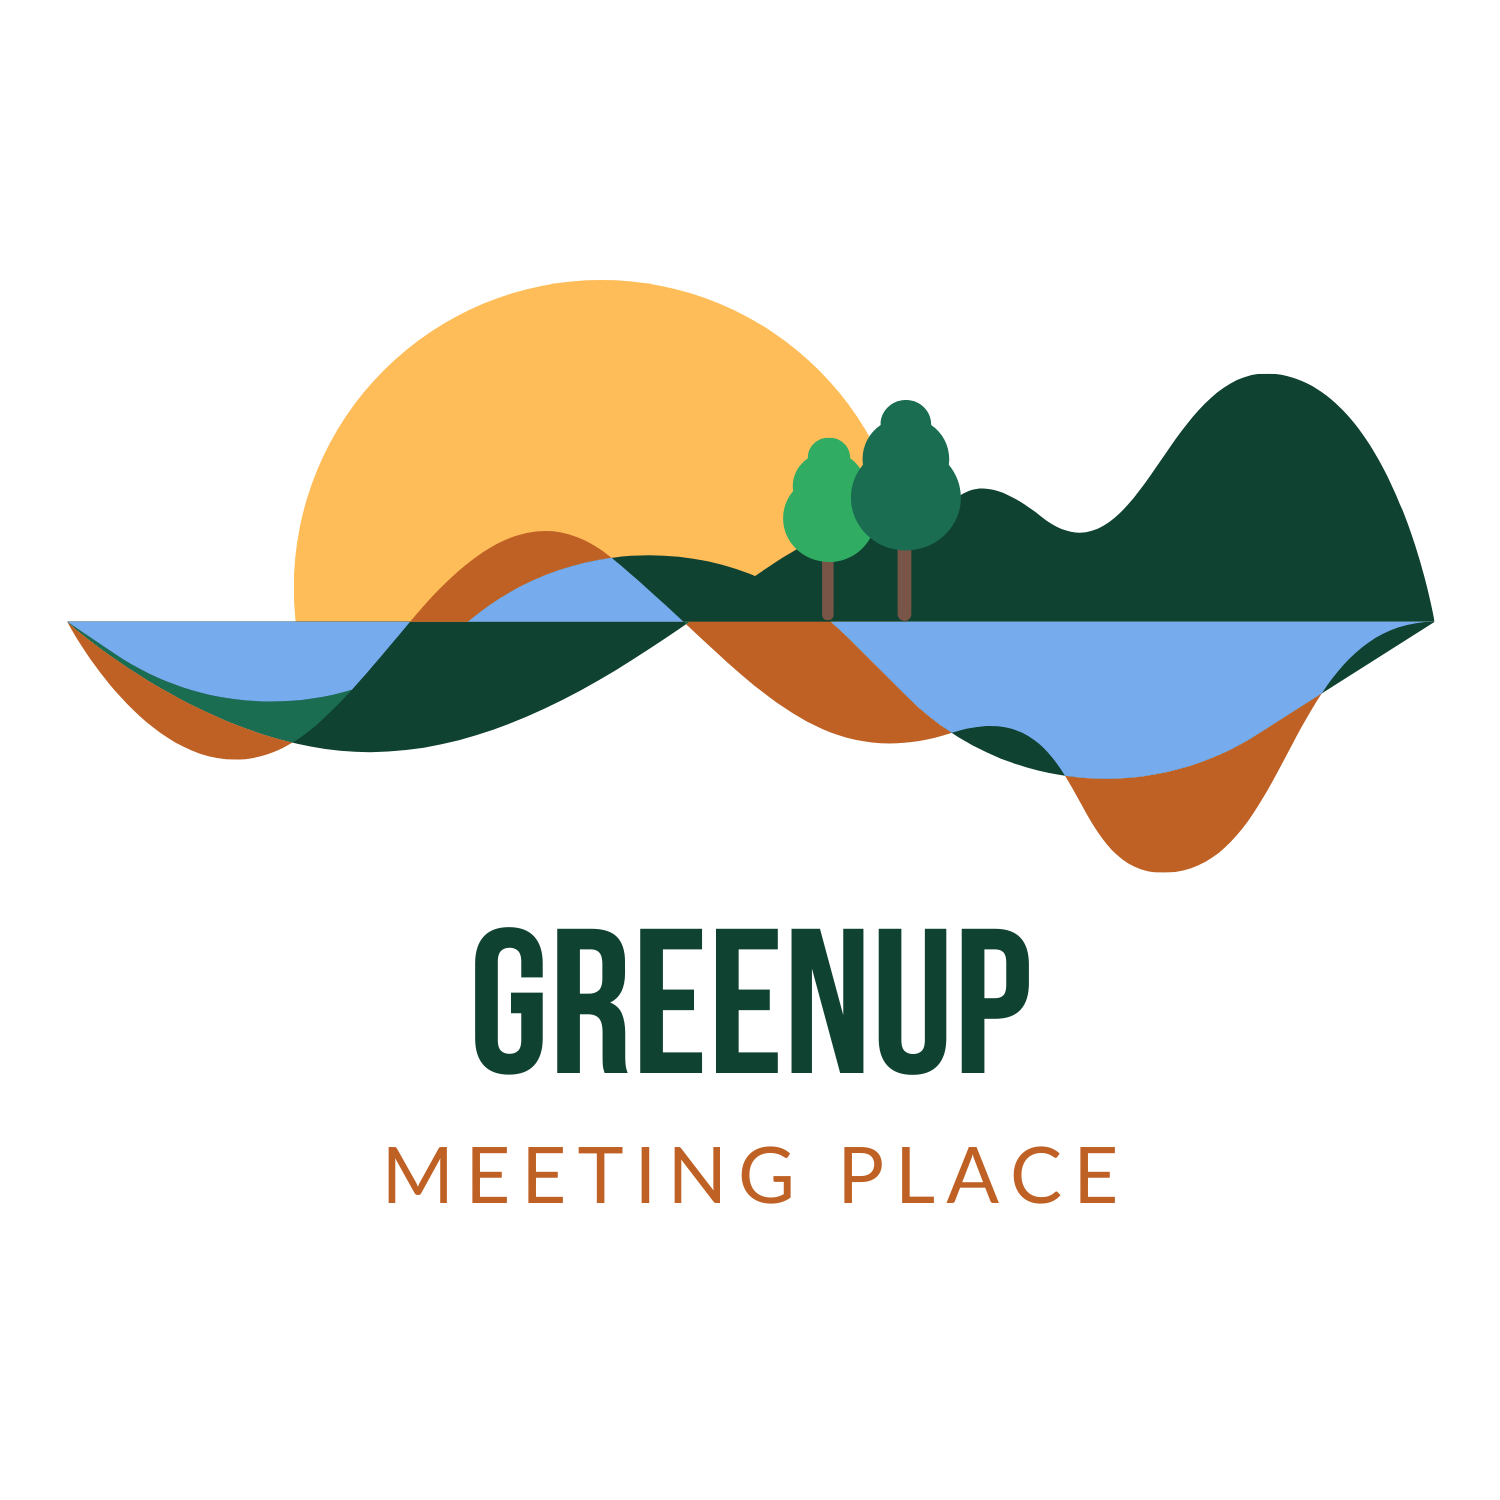 Greenup Meeting Place